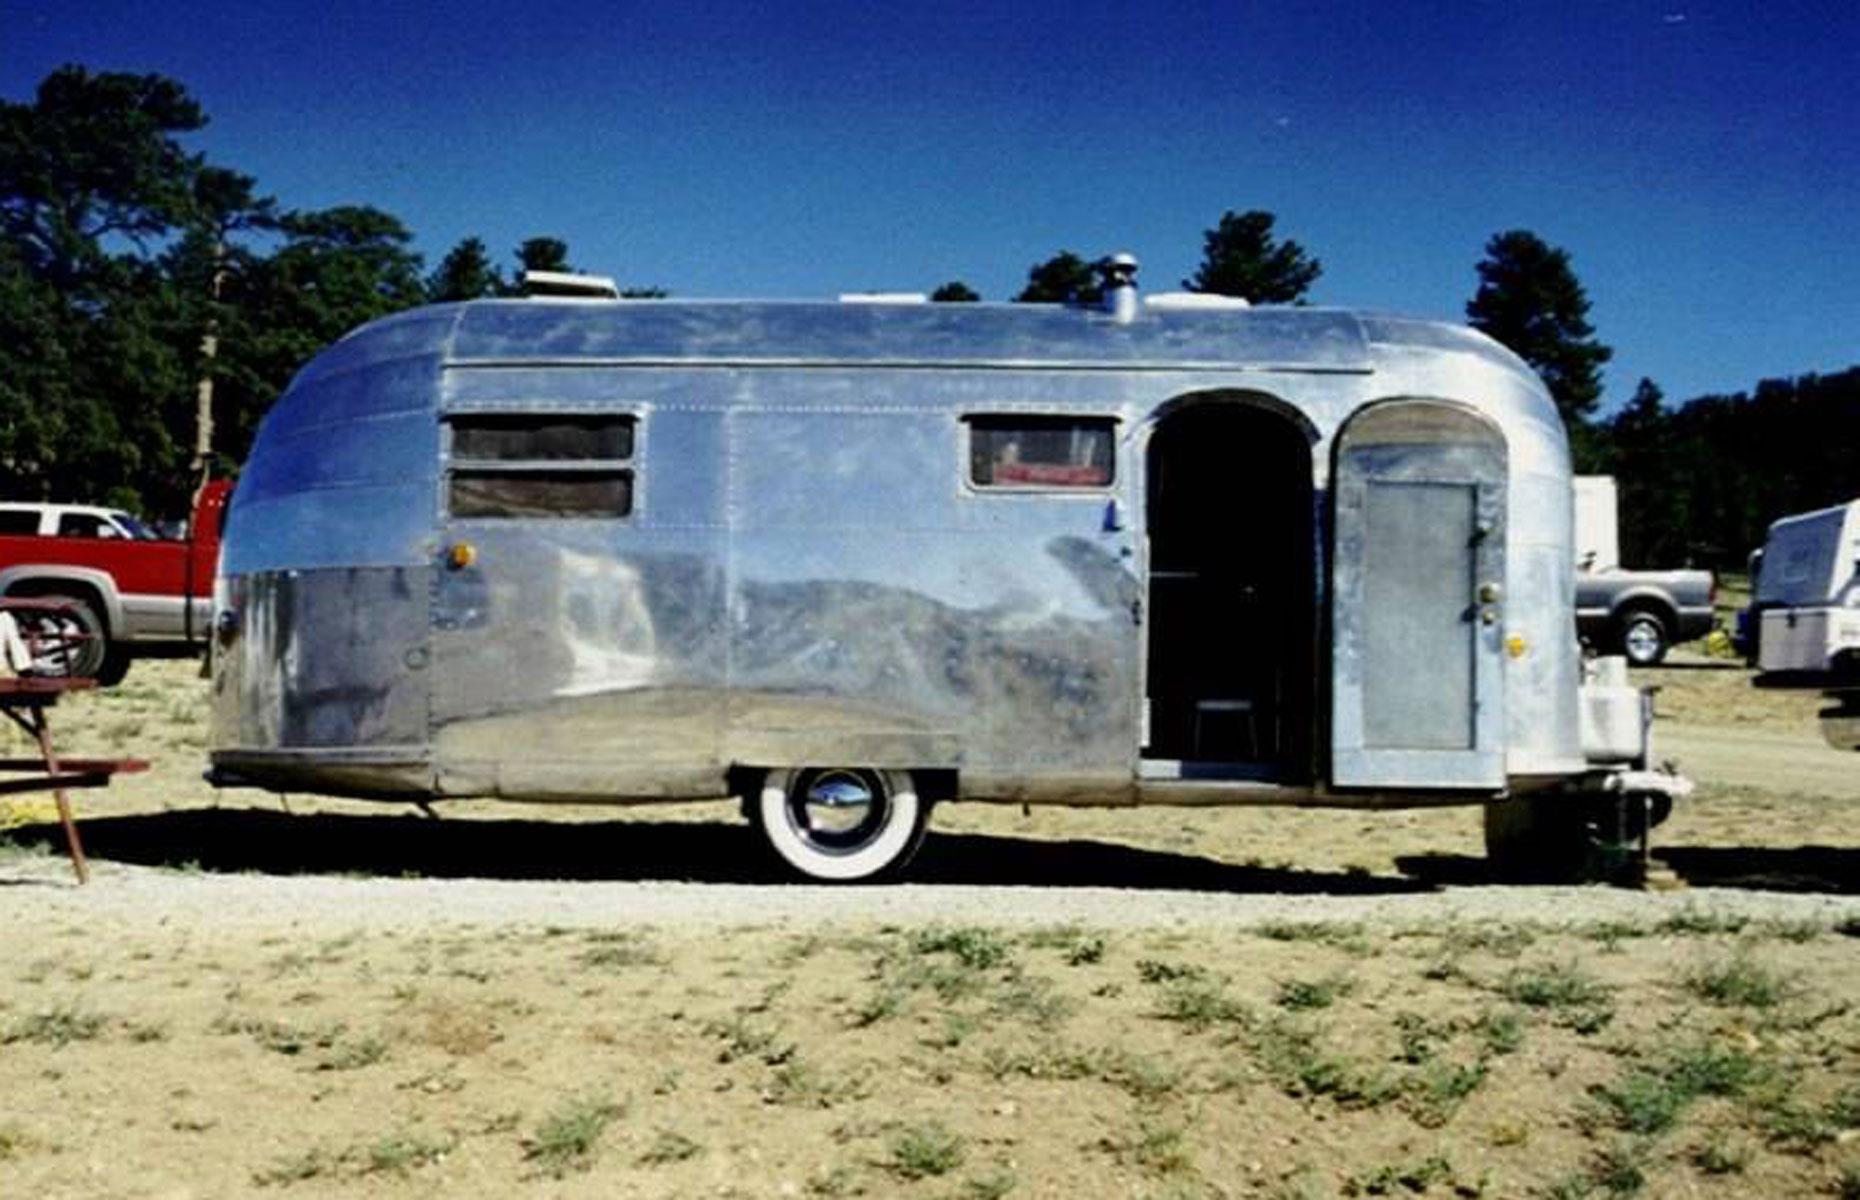 <p>Once the war had ended, Byam re-established Airstream. Applying the airplane design skills he learned during the war, Byam created the Curtis Wright Clipper in 1948. The upgraded Clipper was an overnight success, selling in the thousands. In 1950, Byam created the Flying Cloud, which is still produced today.</p>  <p><strong><a href="https://www.loveexploring.com/galleries/131025/the-amazing-history-of-rving-in-america?page=1">Read about the amazing history of RVing in America</a></strong></p>